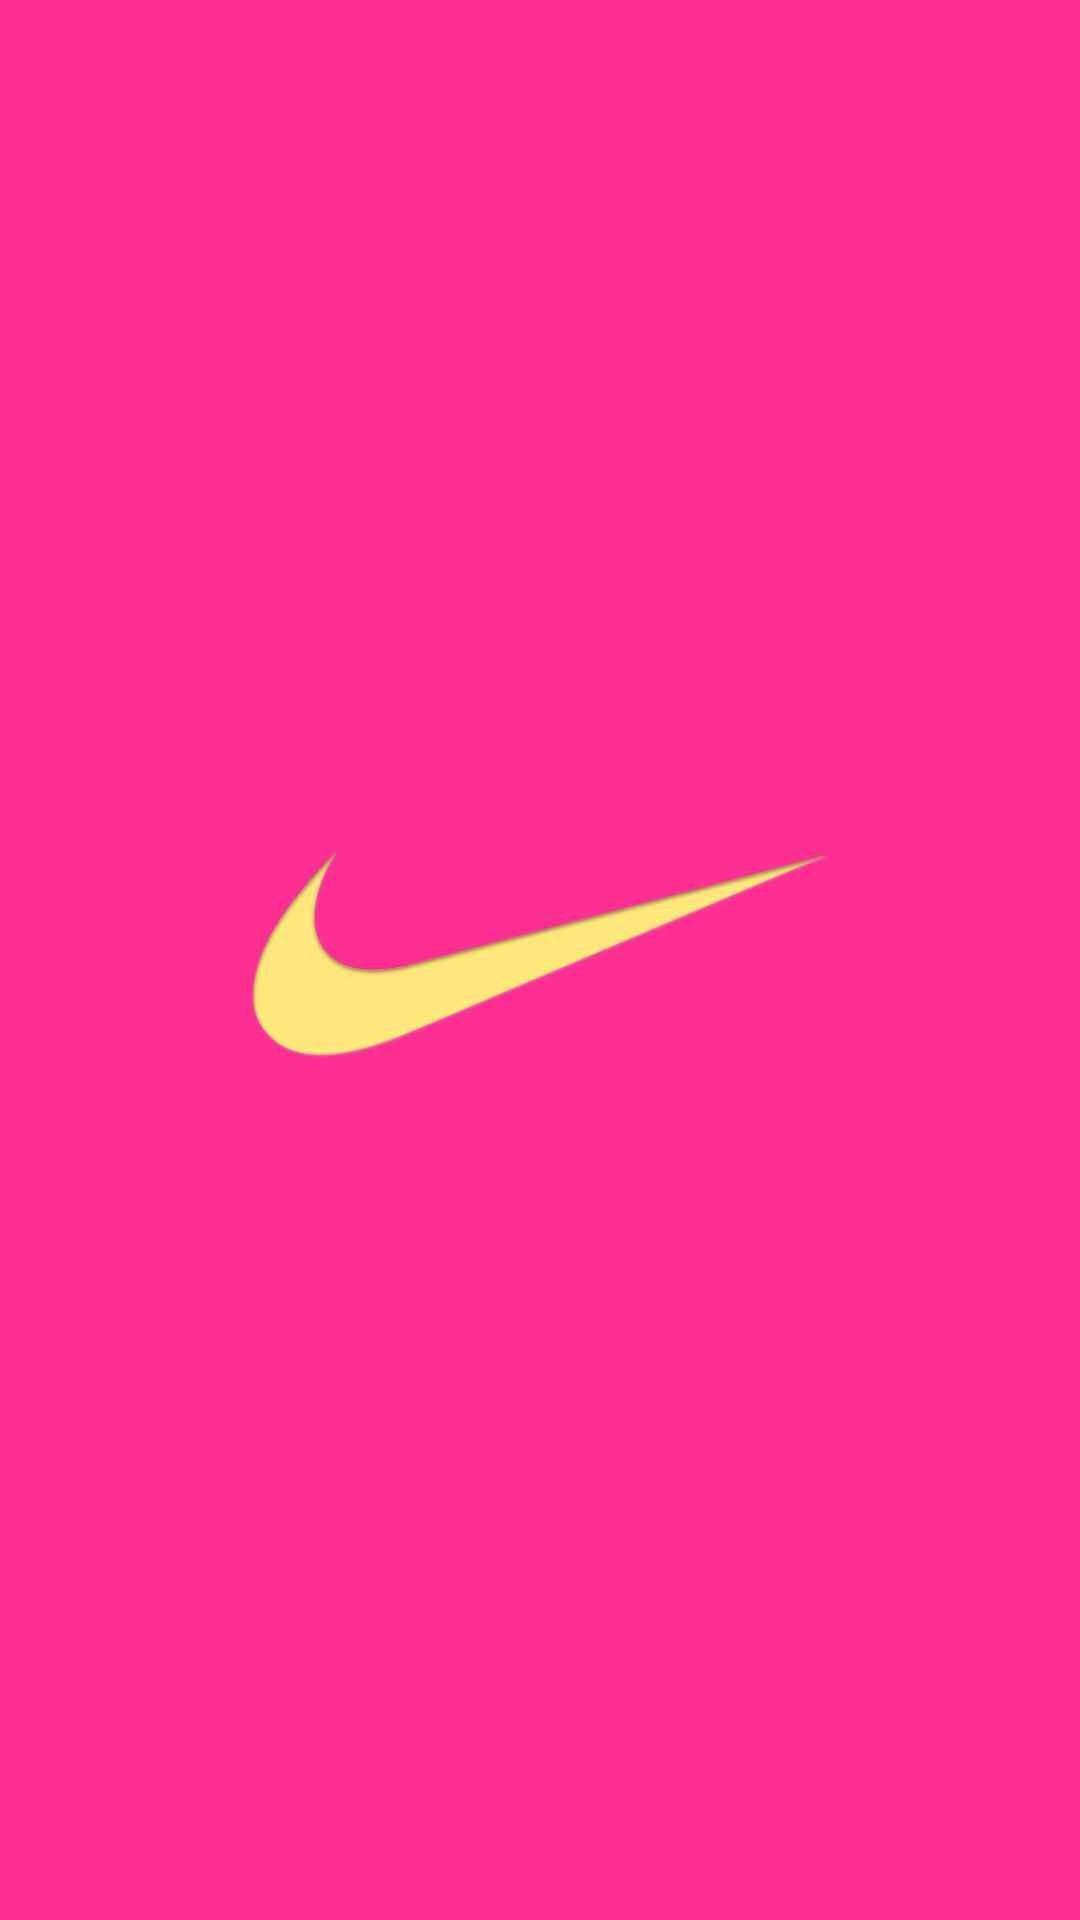 Nike 1080x1920 Wallpapers - Top Free Nike 1080x1920 Backgrounds ...